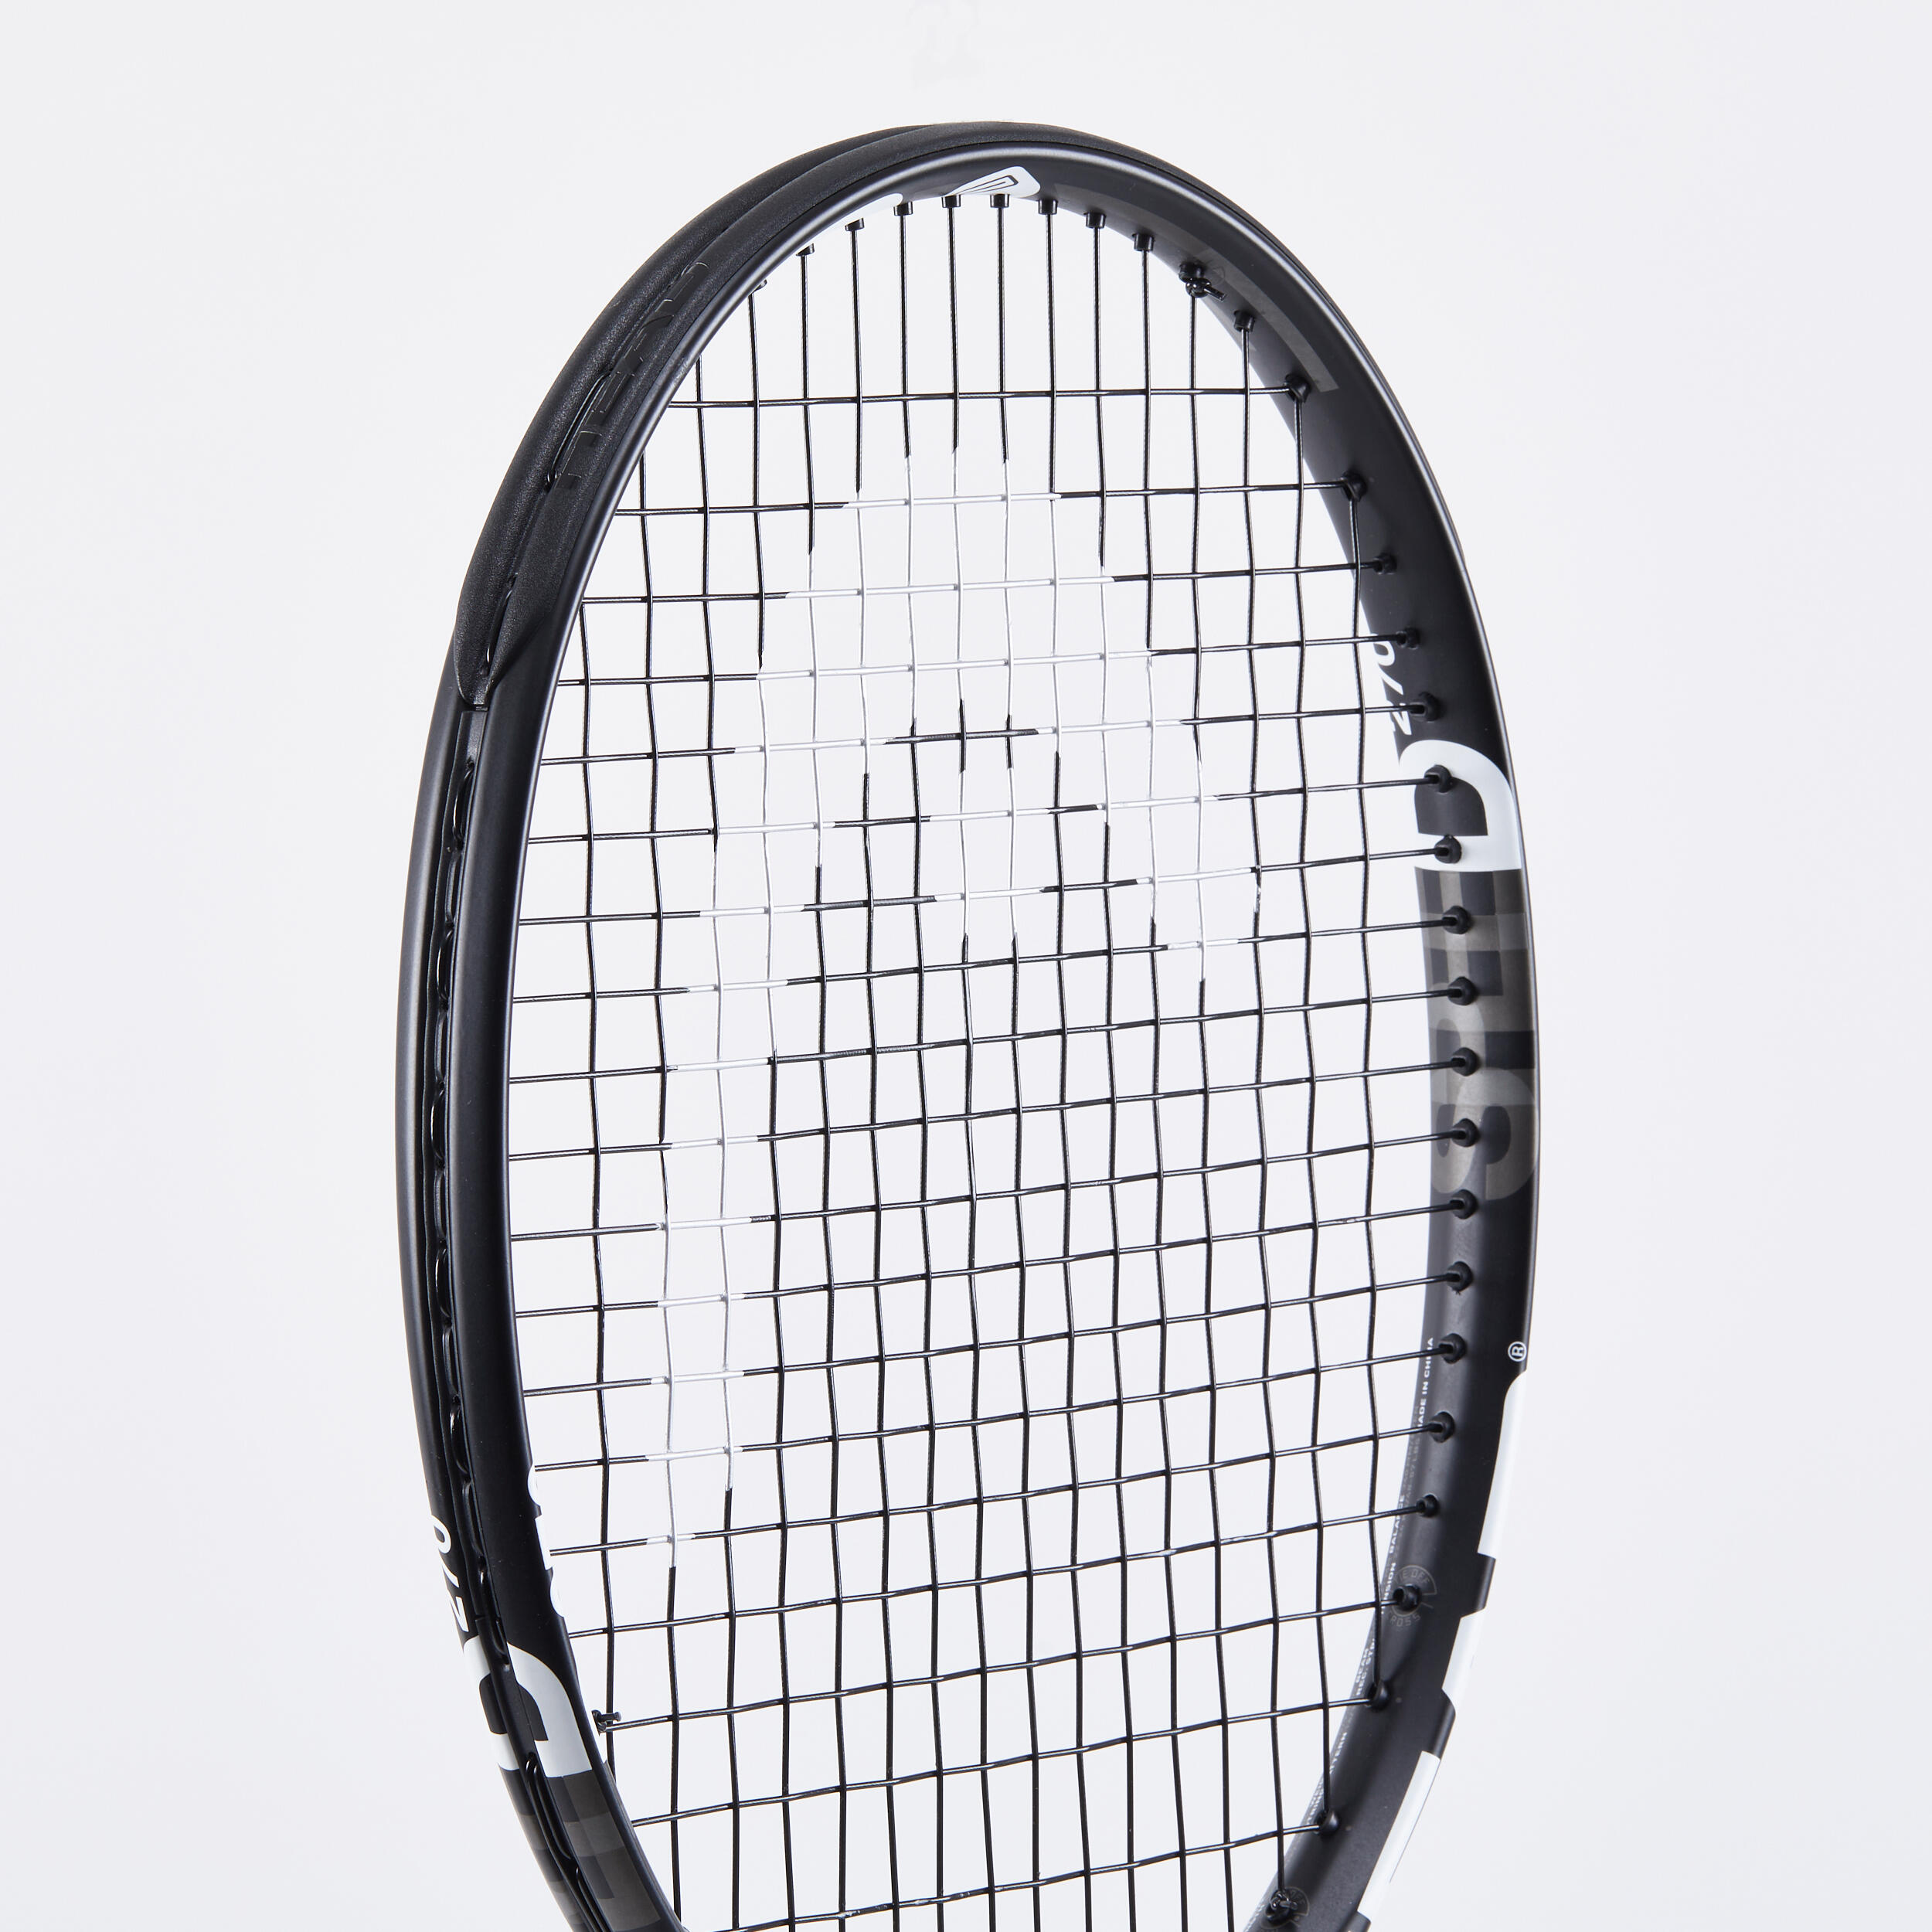 Adult Tennis Racket Speed GTouch 270 - Black 4/6